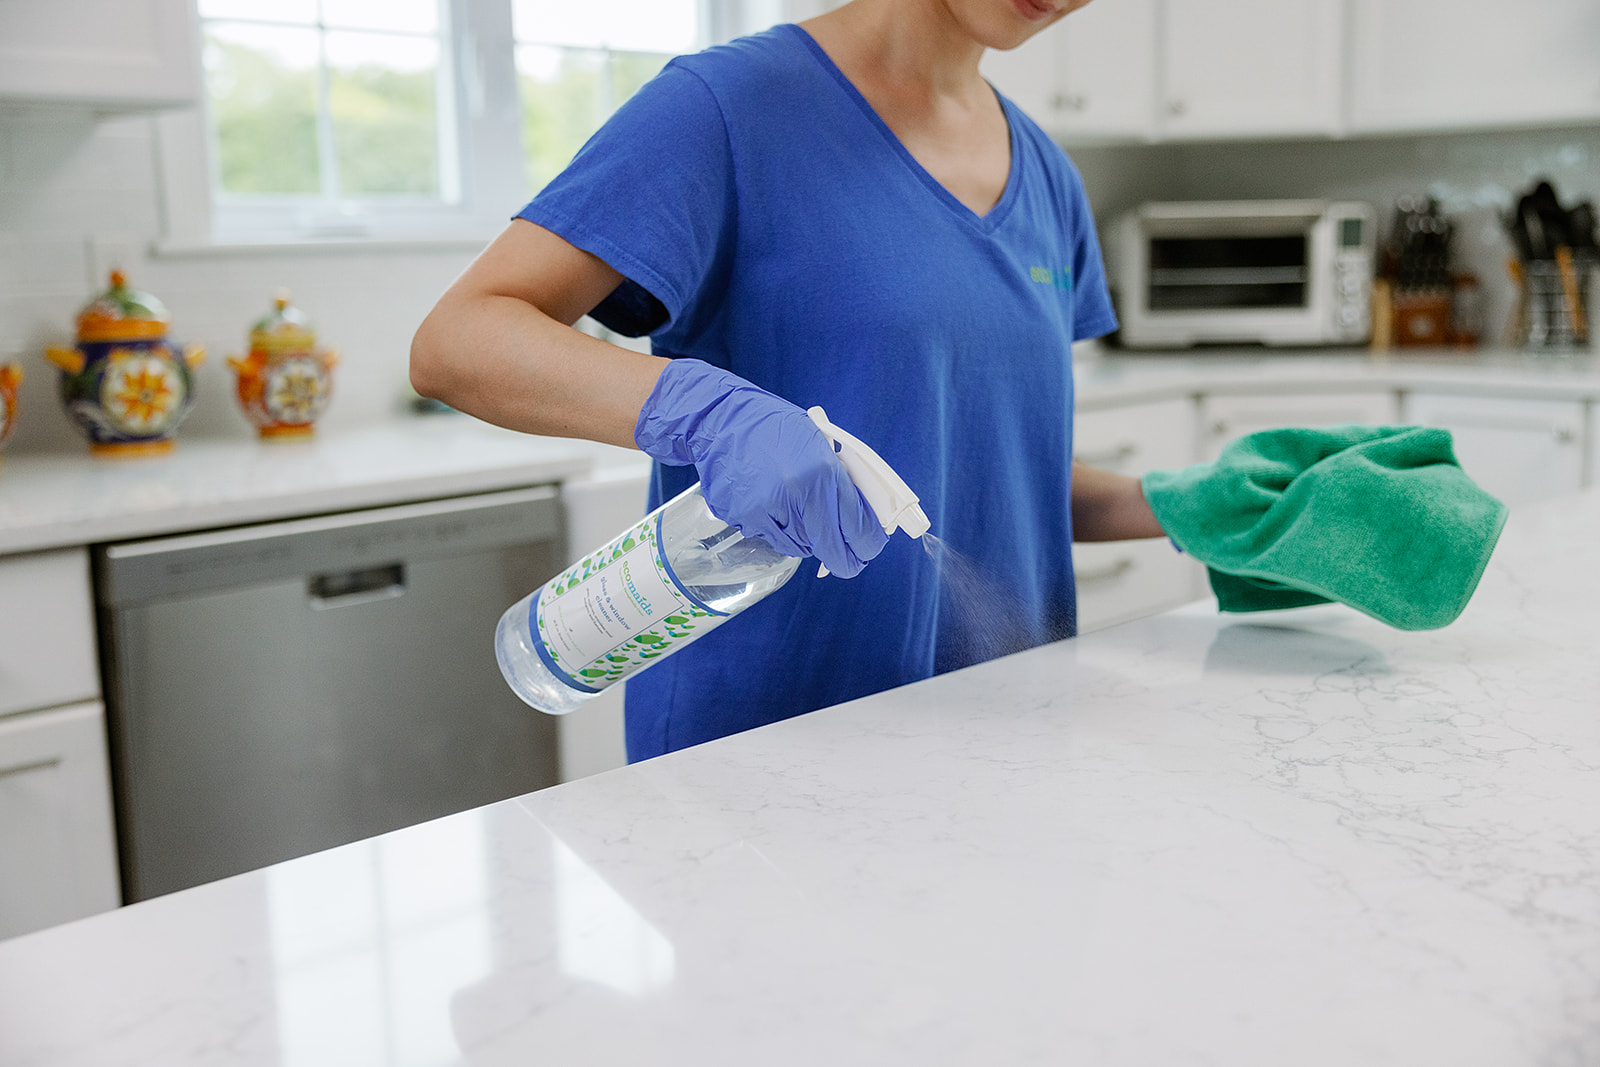 Maid Services in Kennewick